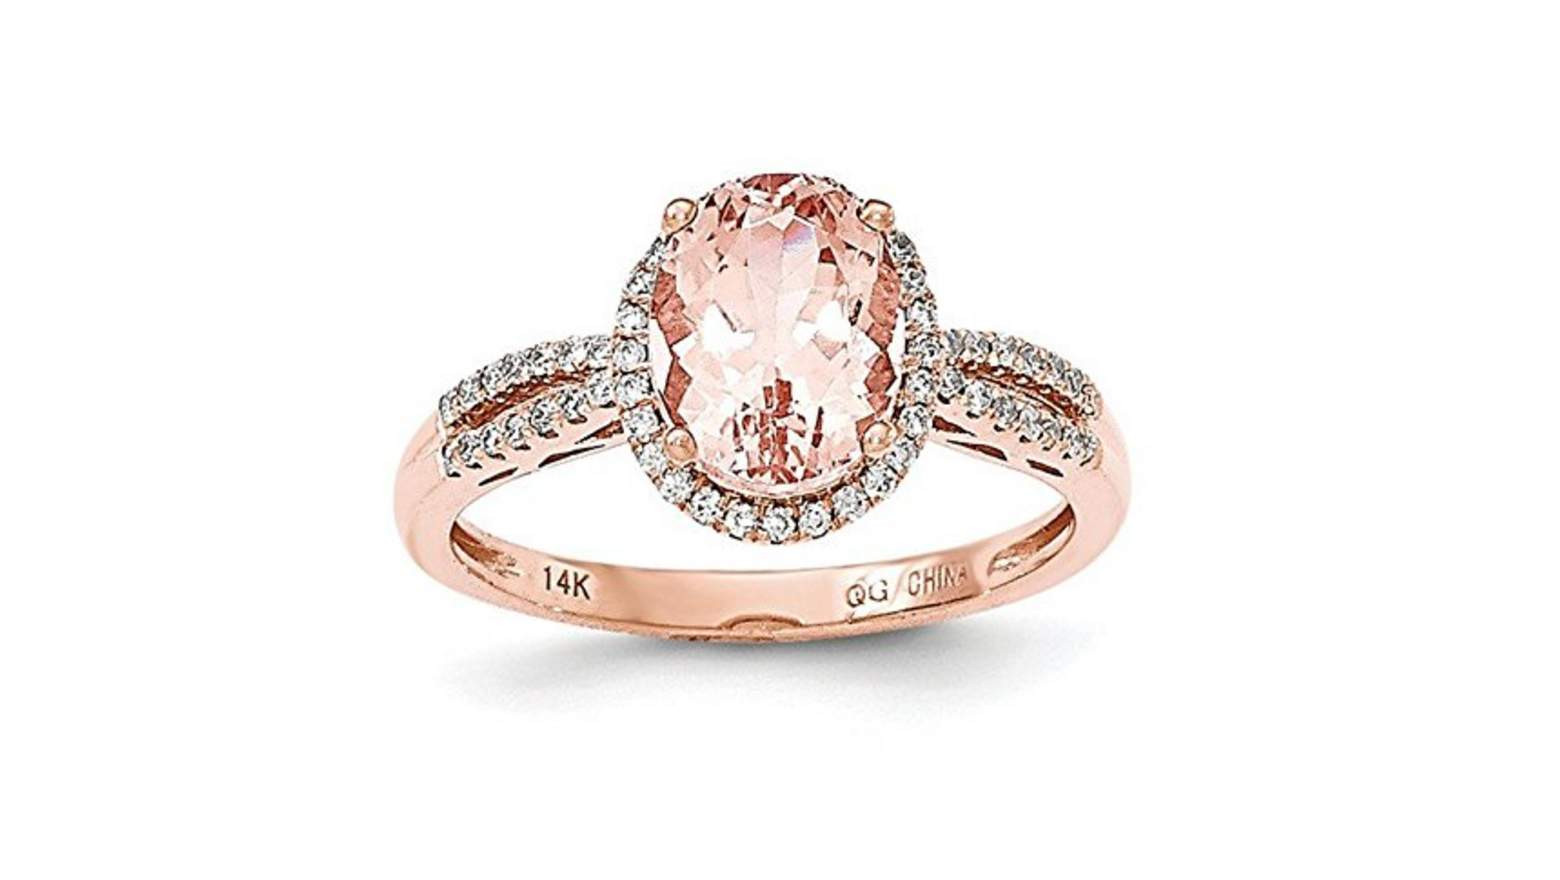 Best Deals On Wedding Rings
 View Full Gallery of Beautiful Cyber Monday Wedding Rings